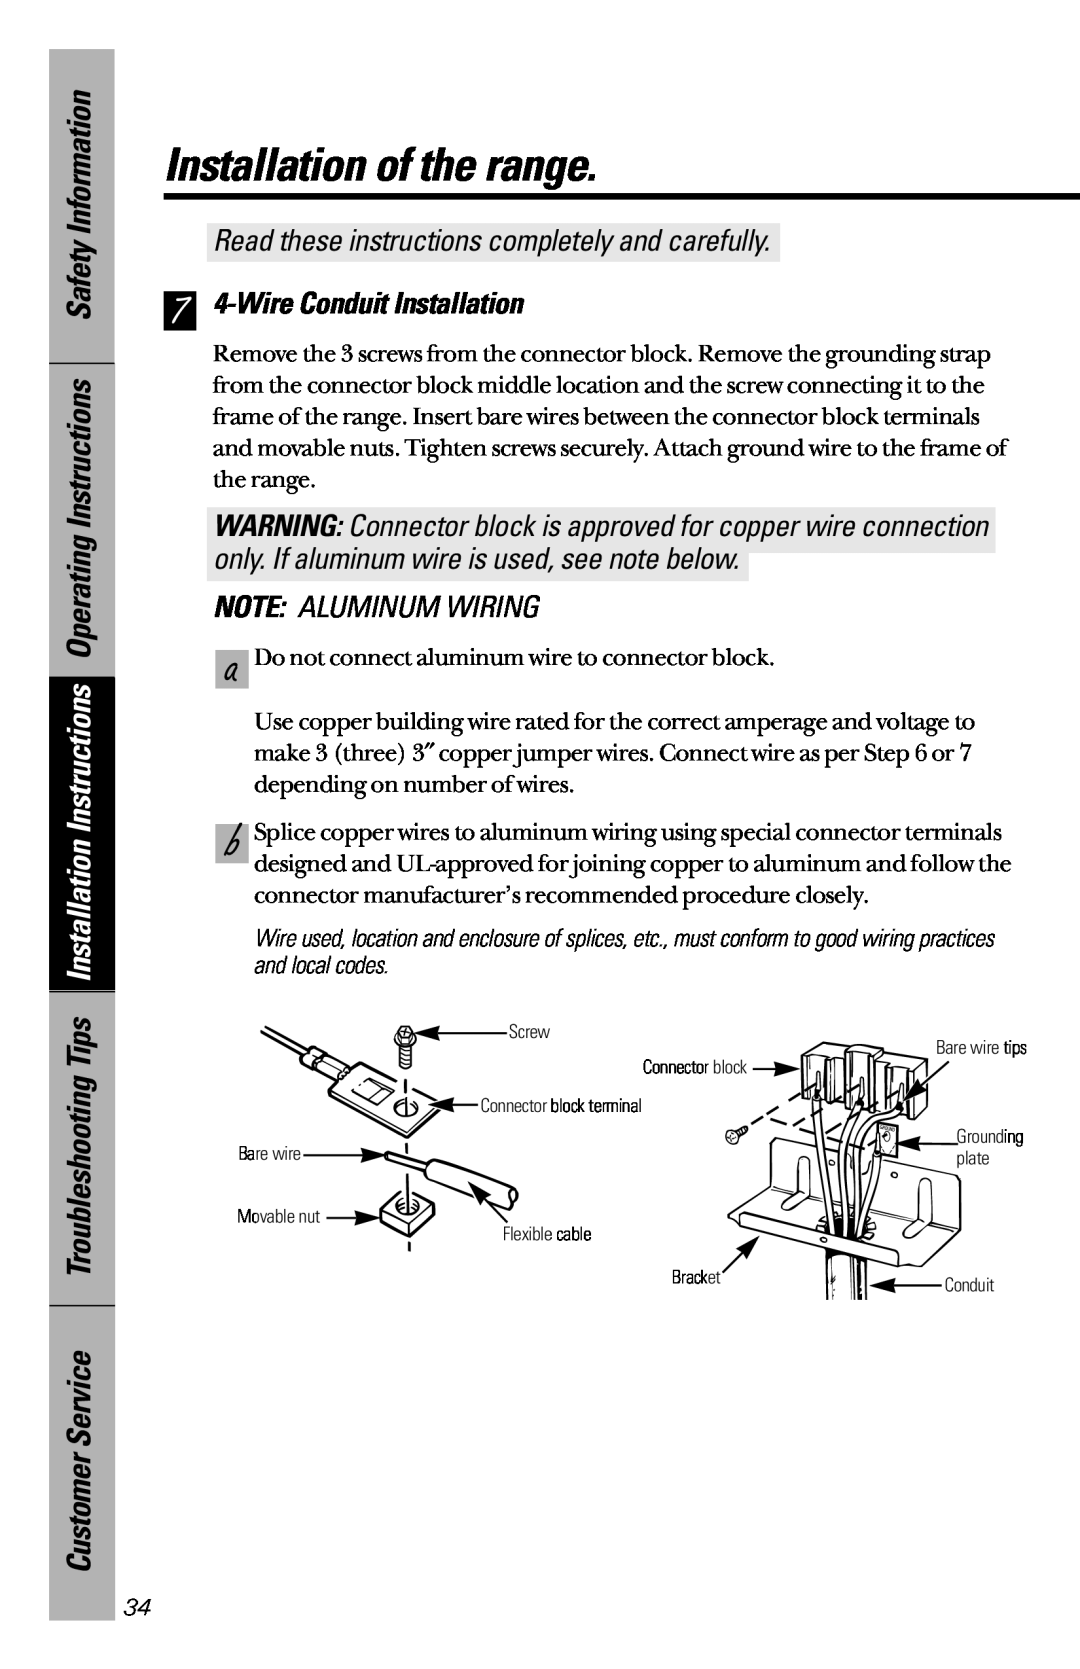 GE JBC27, JBS26 7 4-Wire Conduit Installation, Installation of the range, Read these instructions completely and carefully 